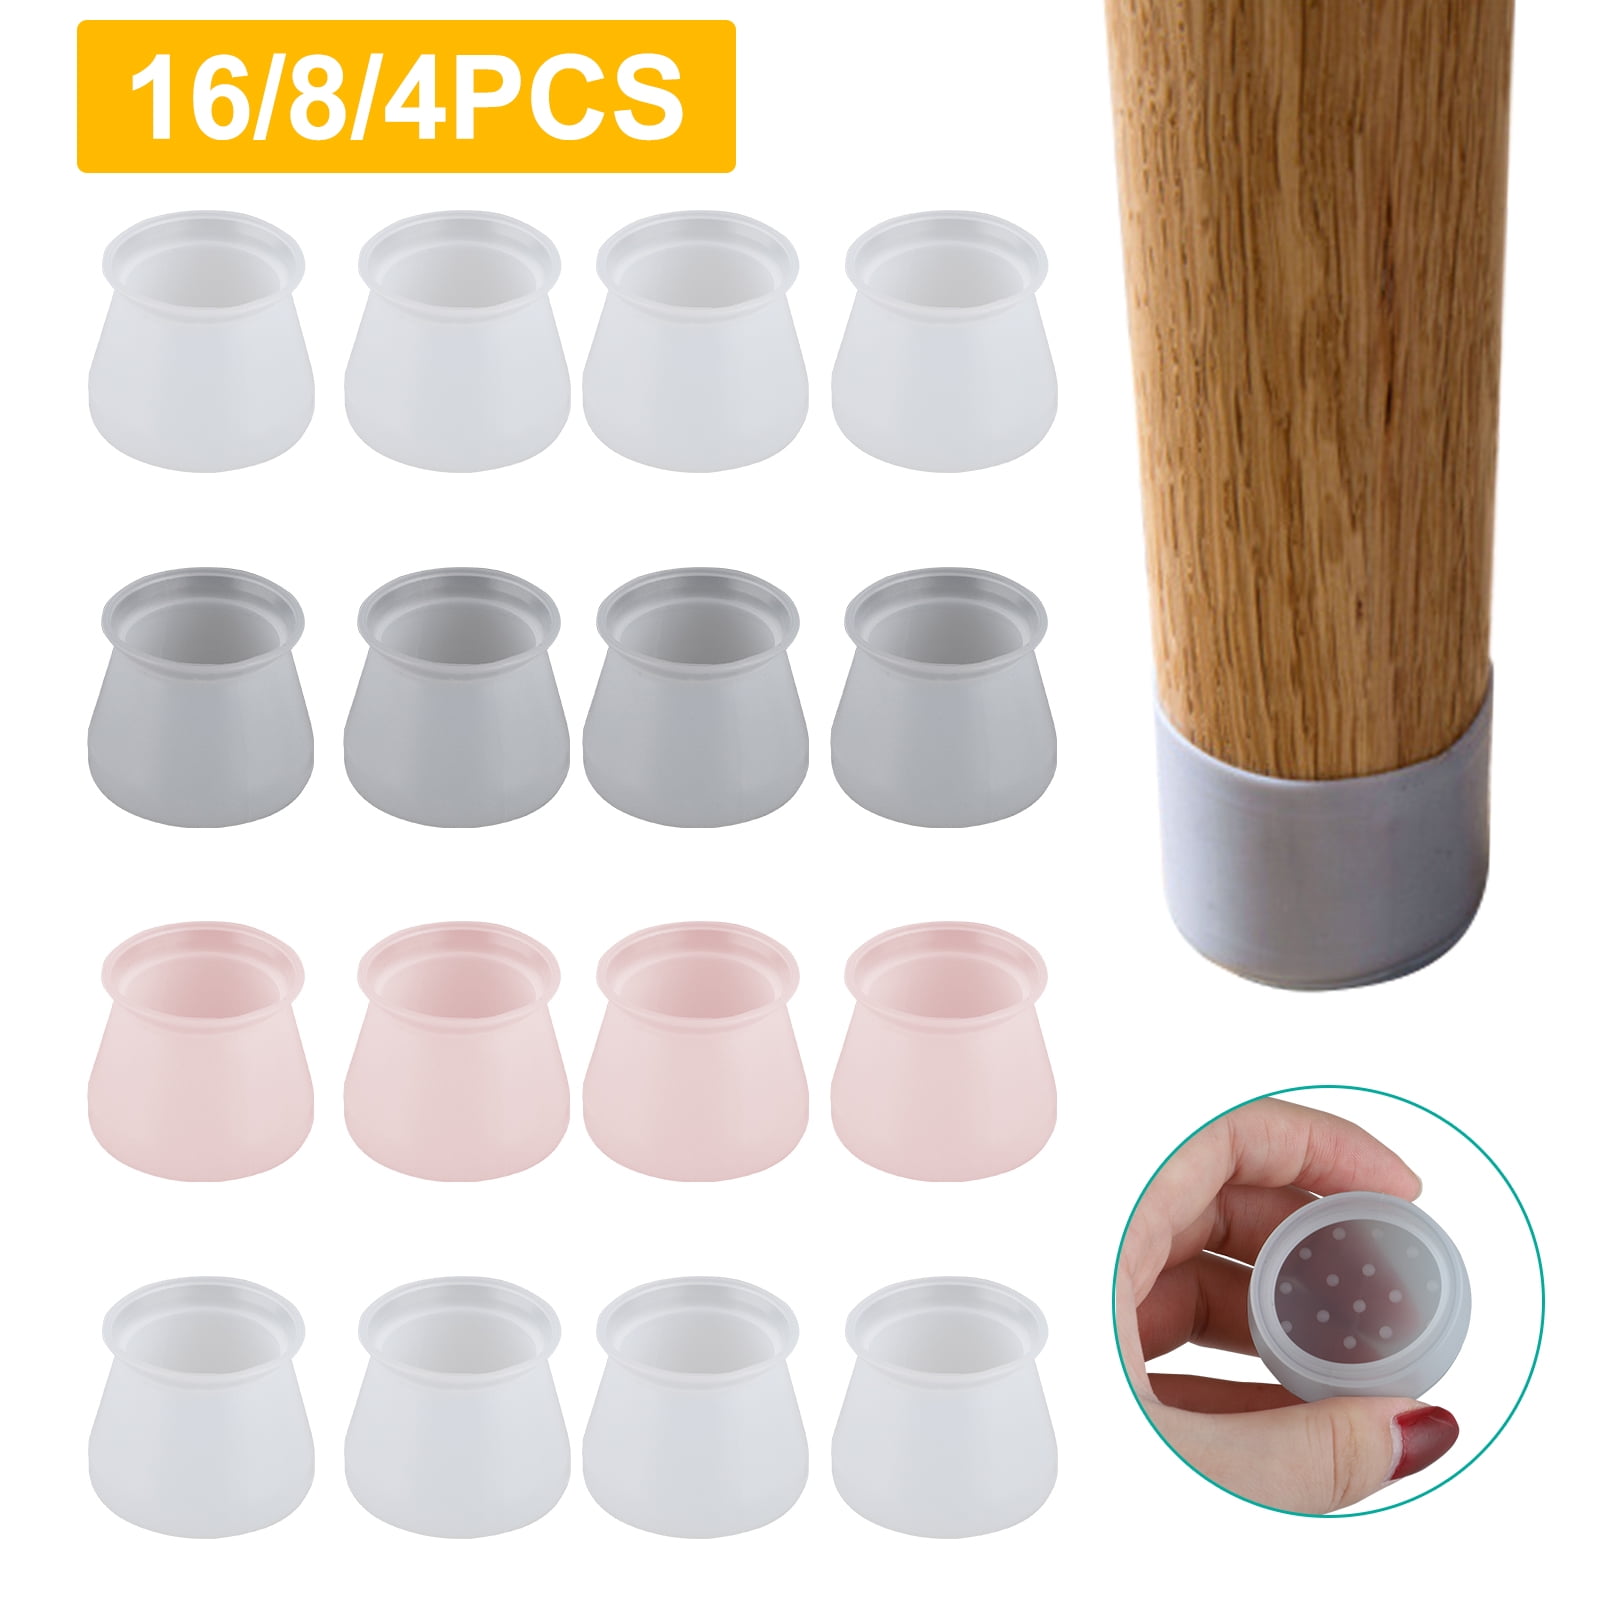 Table Chair Leg Caps Silicone Floor, Dining Room Chair Feet Protectors